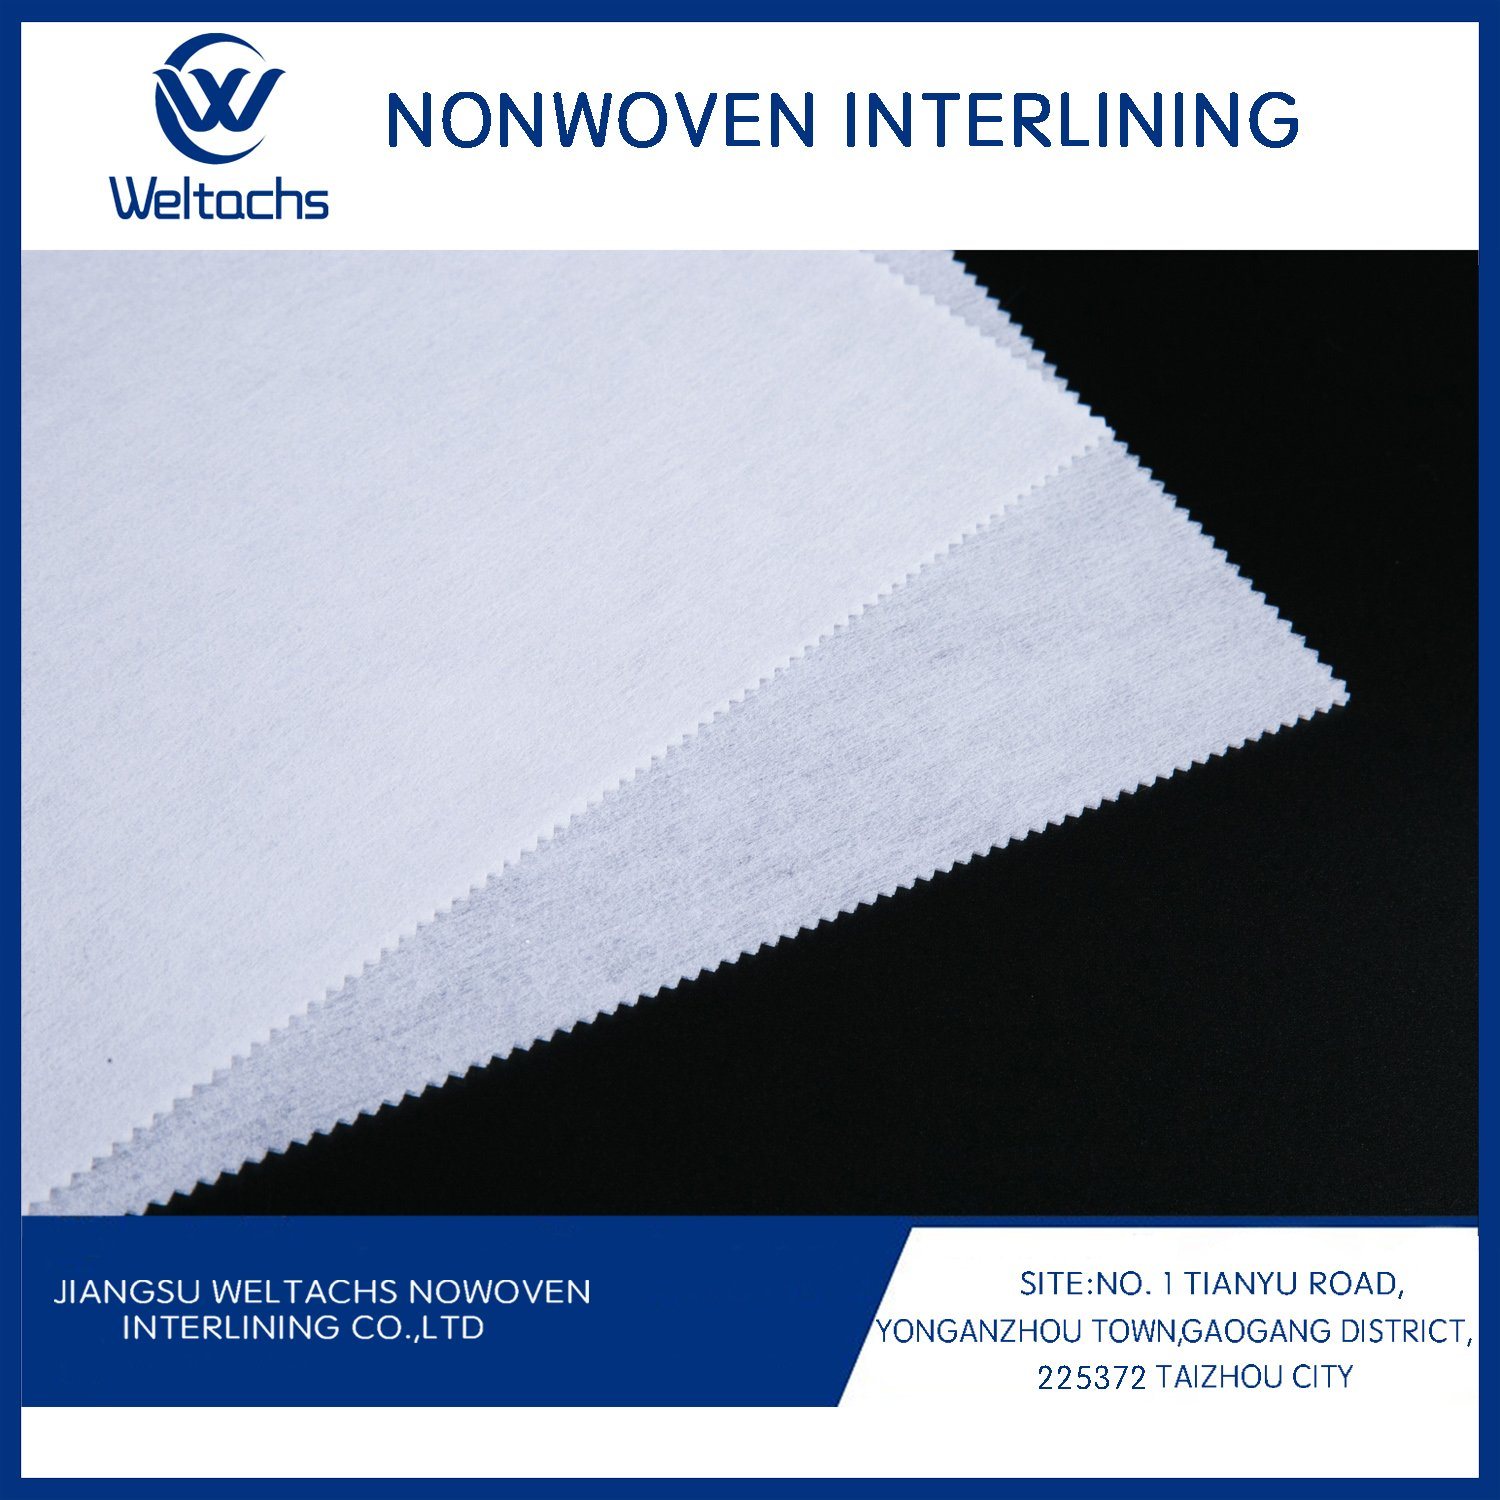 Hemical Bond Fabric Roll Fusible Non Woven Polyester Gum Stay Interlining 1025hf Cut Away Nonwoven Interlining